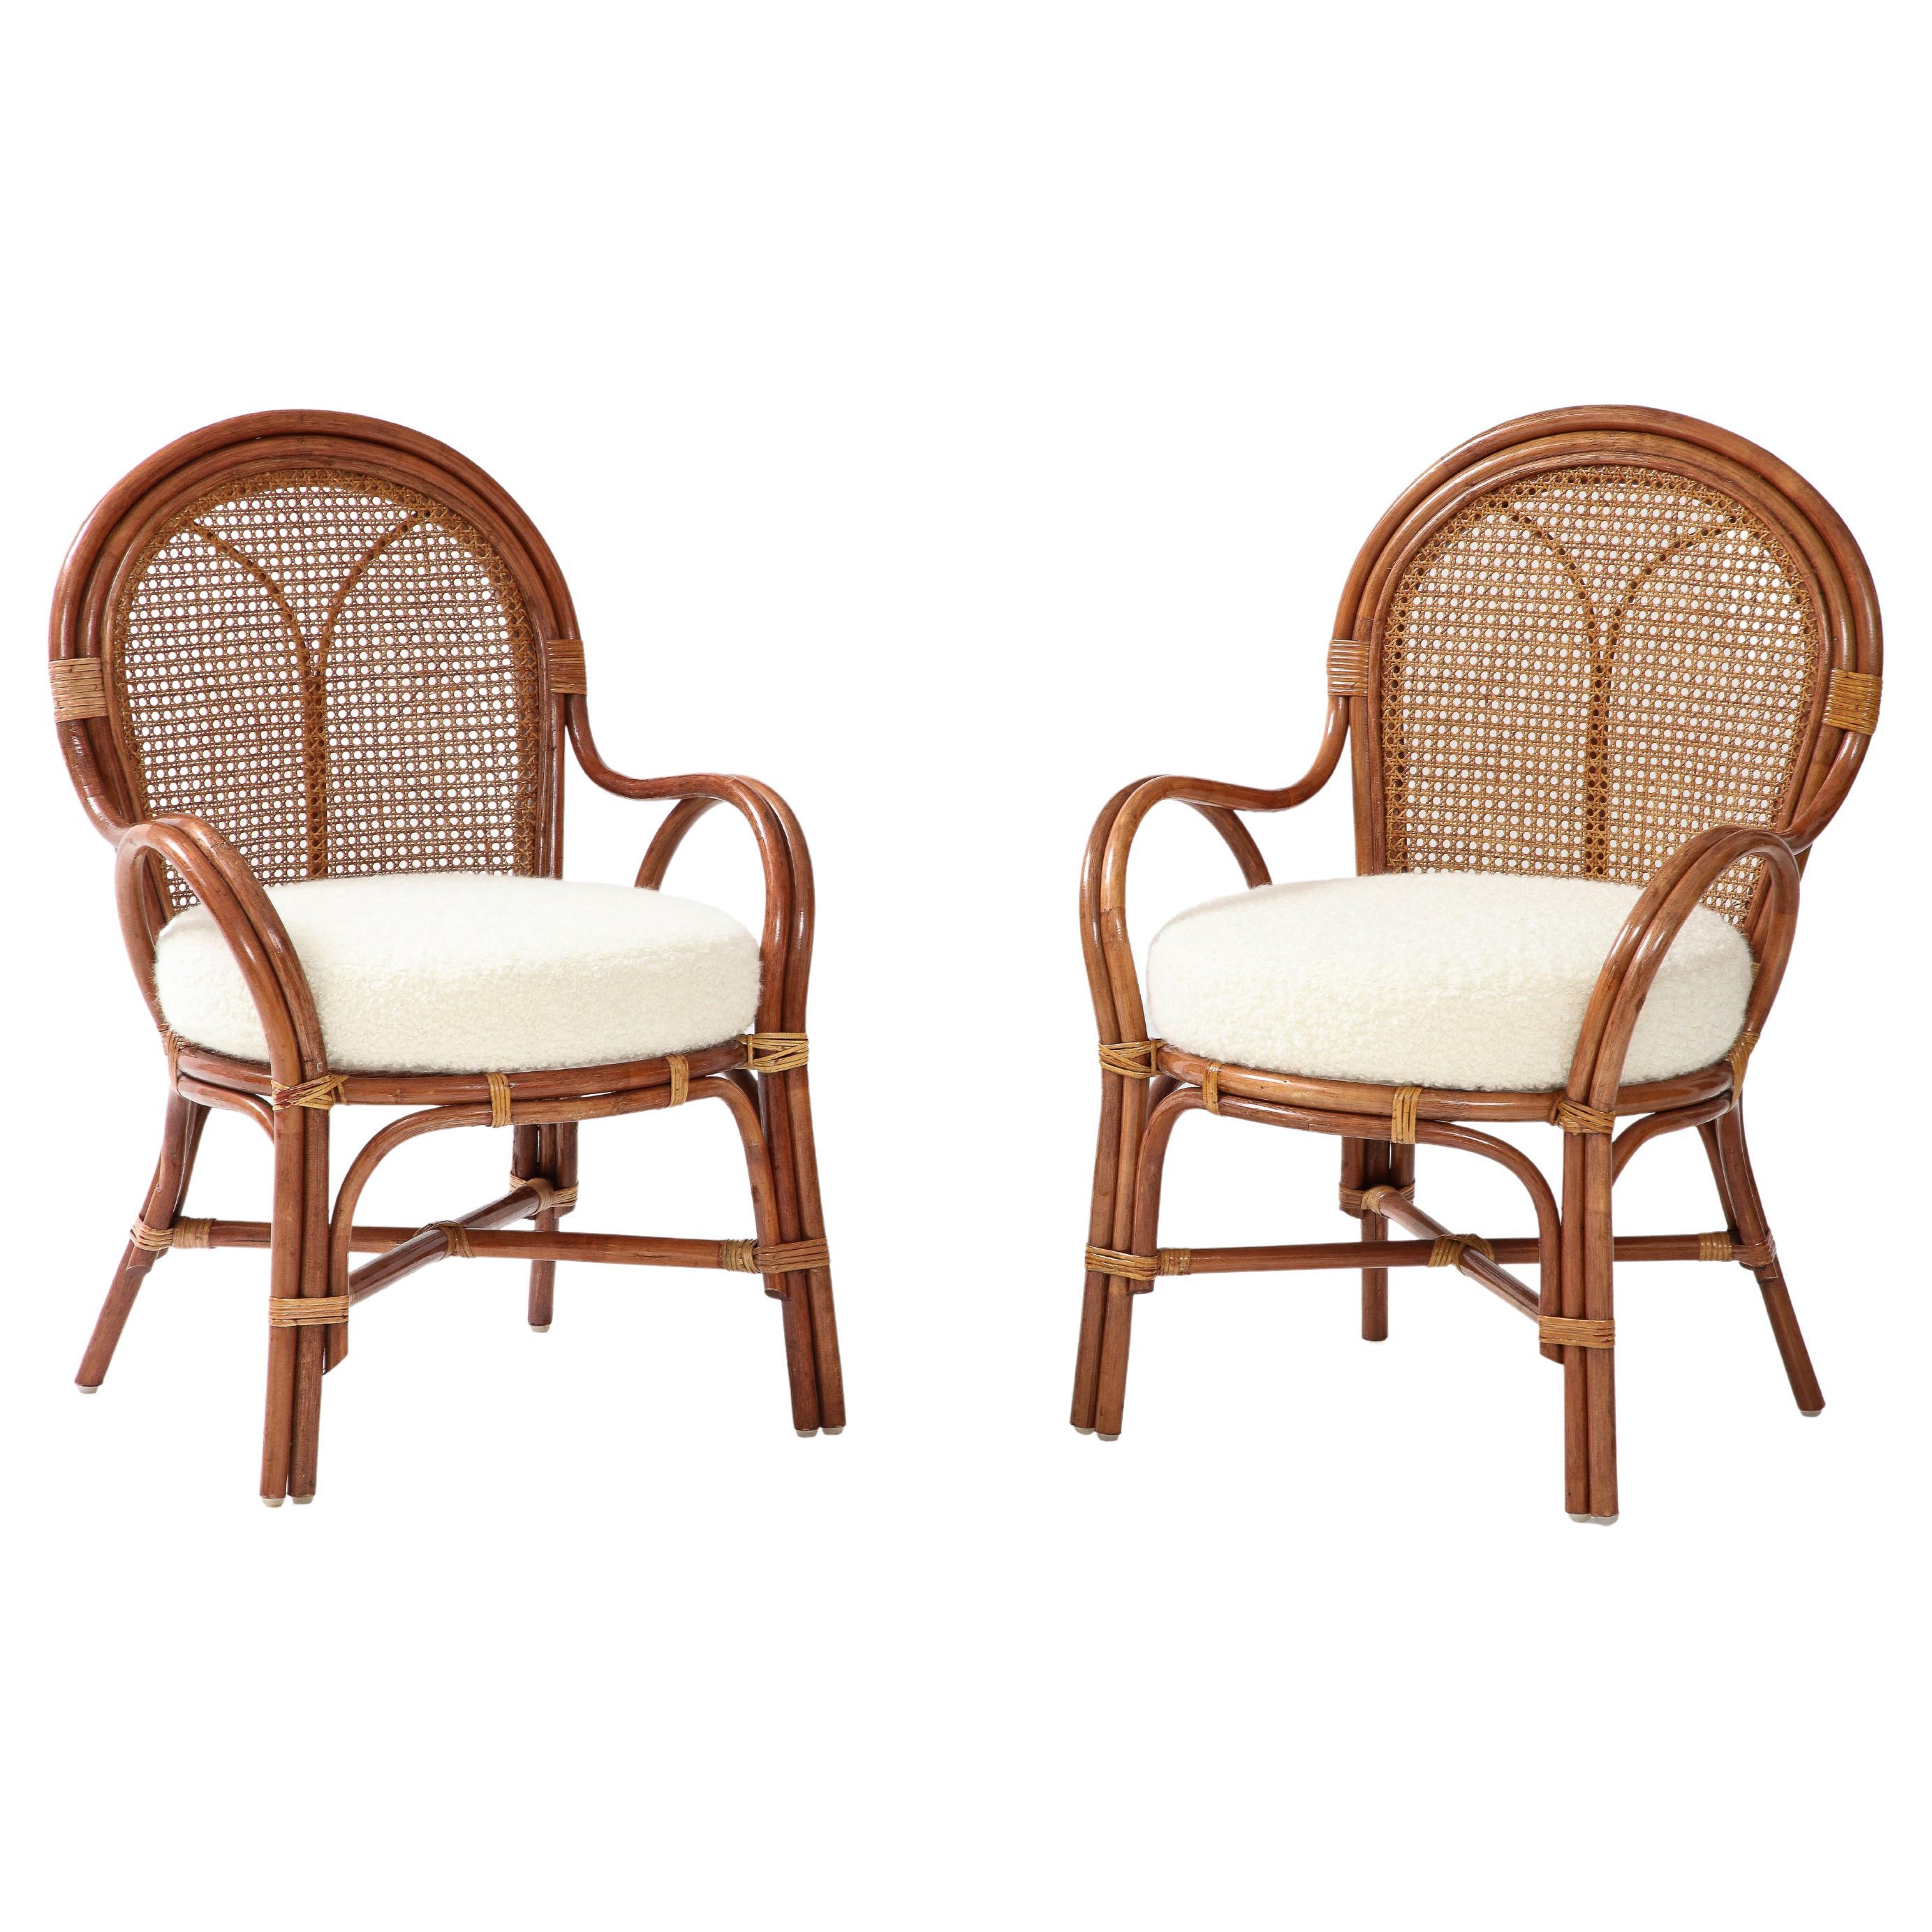 1950s Italian Pair of Bamboo and Rattan Armchairs with Ivory Bouclé Cushions